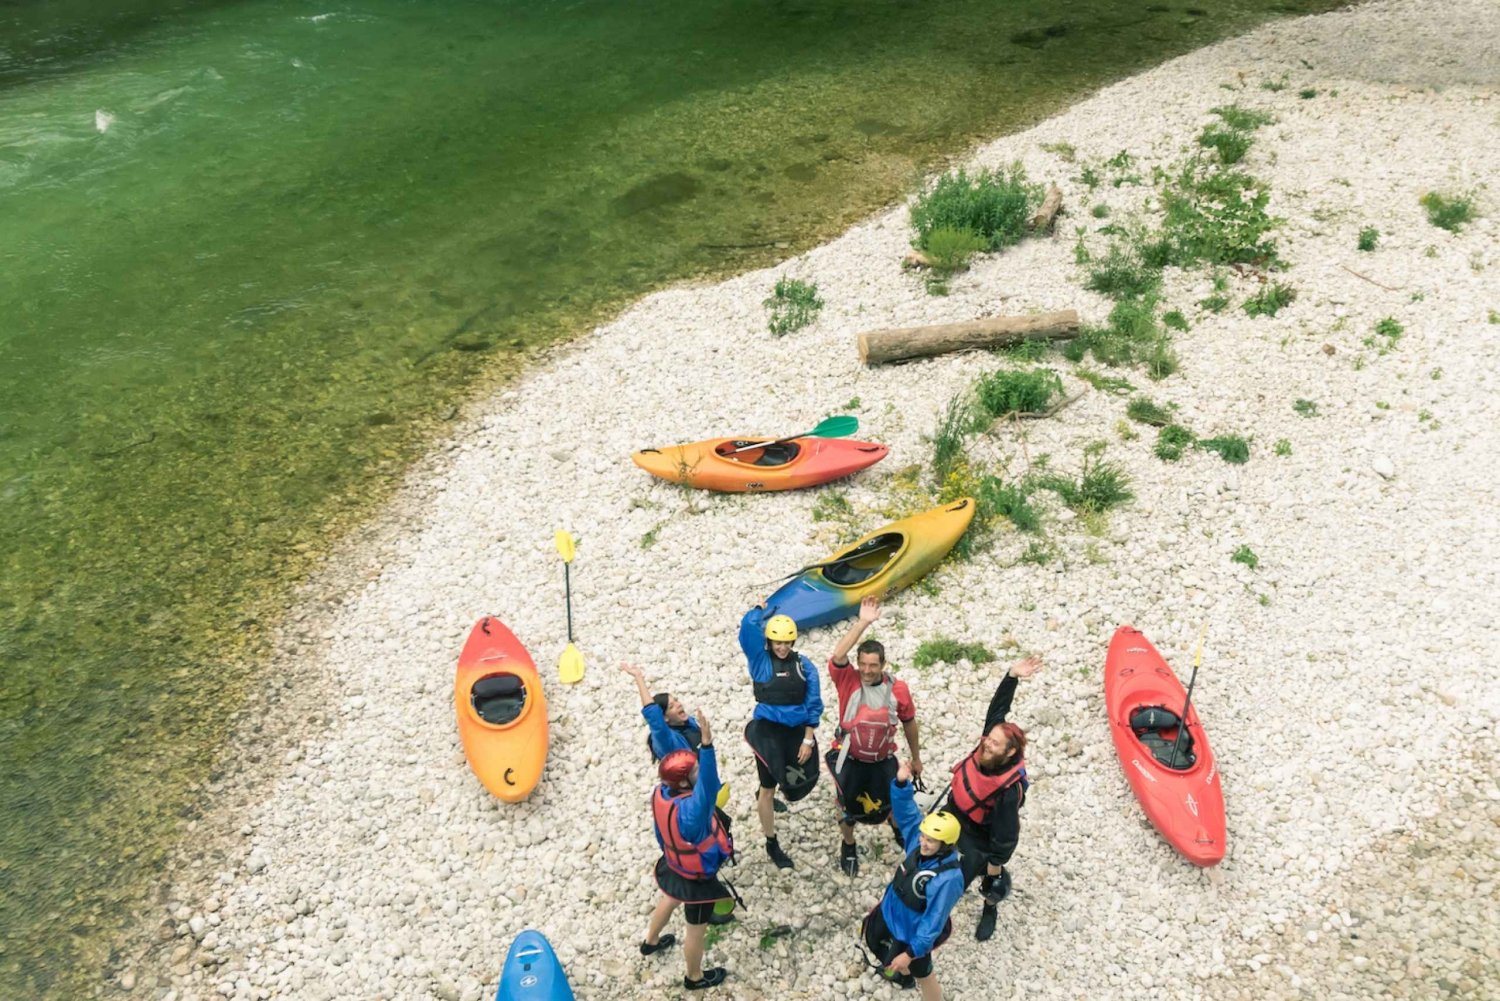 From Bled: Sava River Kayaking Adventure